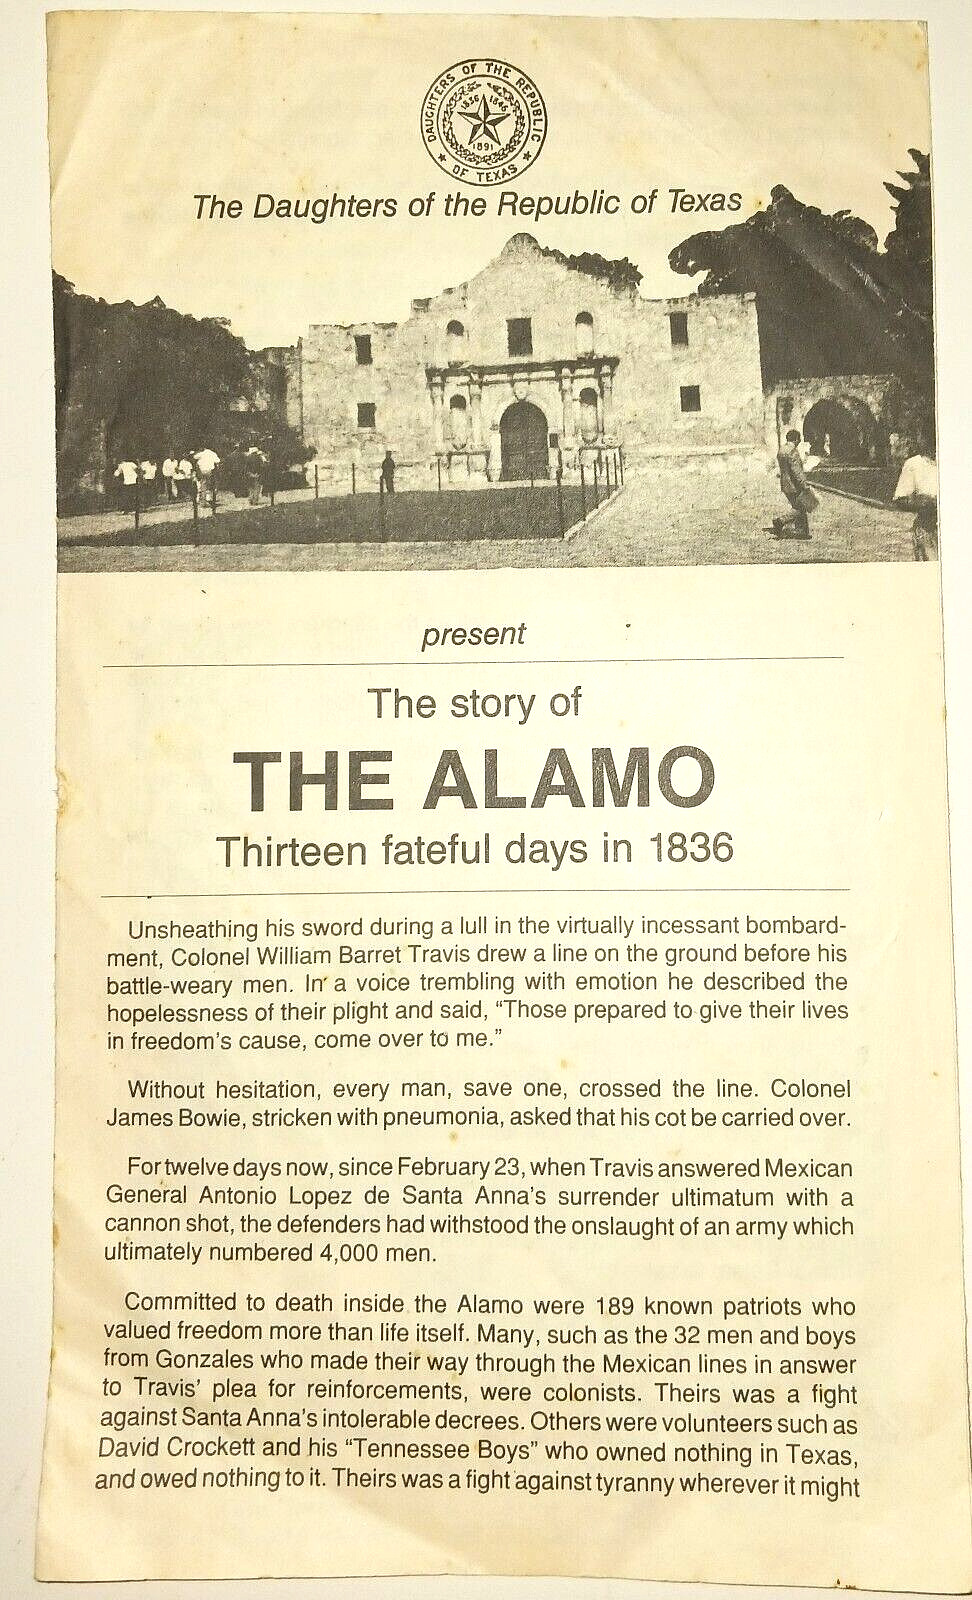 The Story of THE ALAMO 13 Fateful Days 1836 Pamphlet